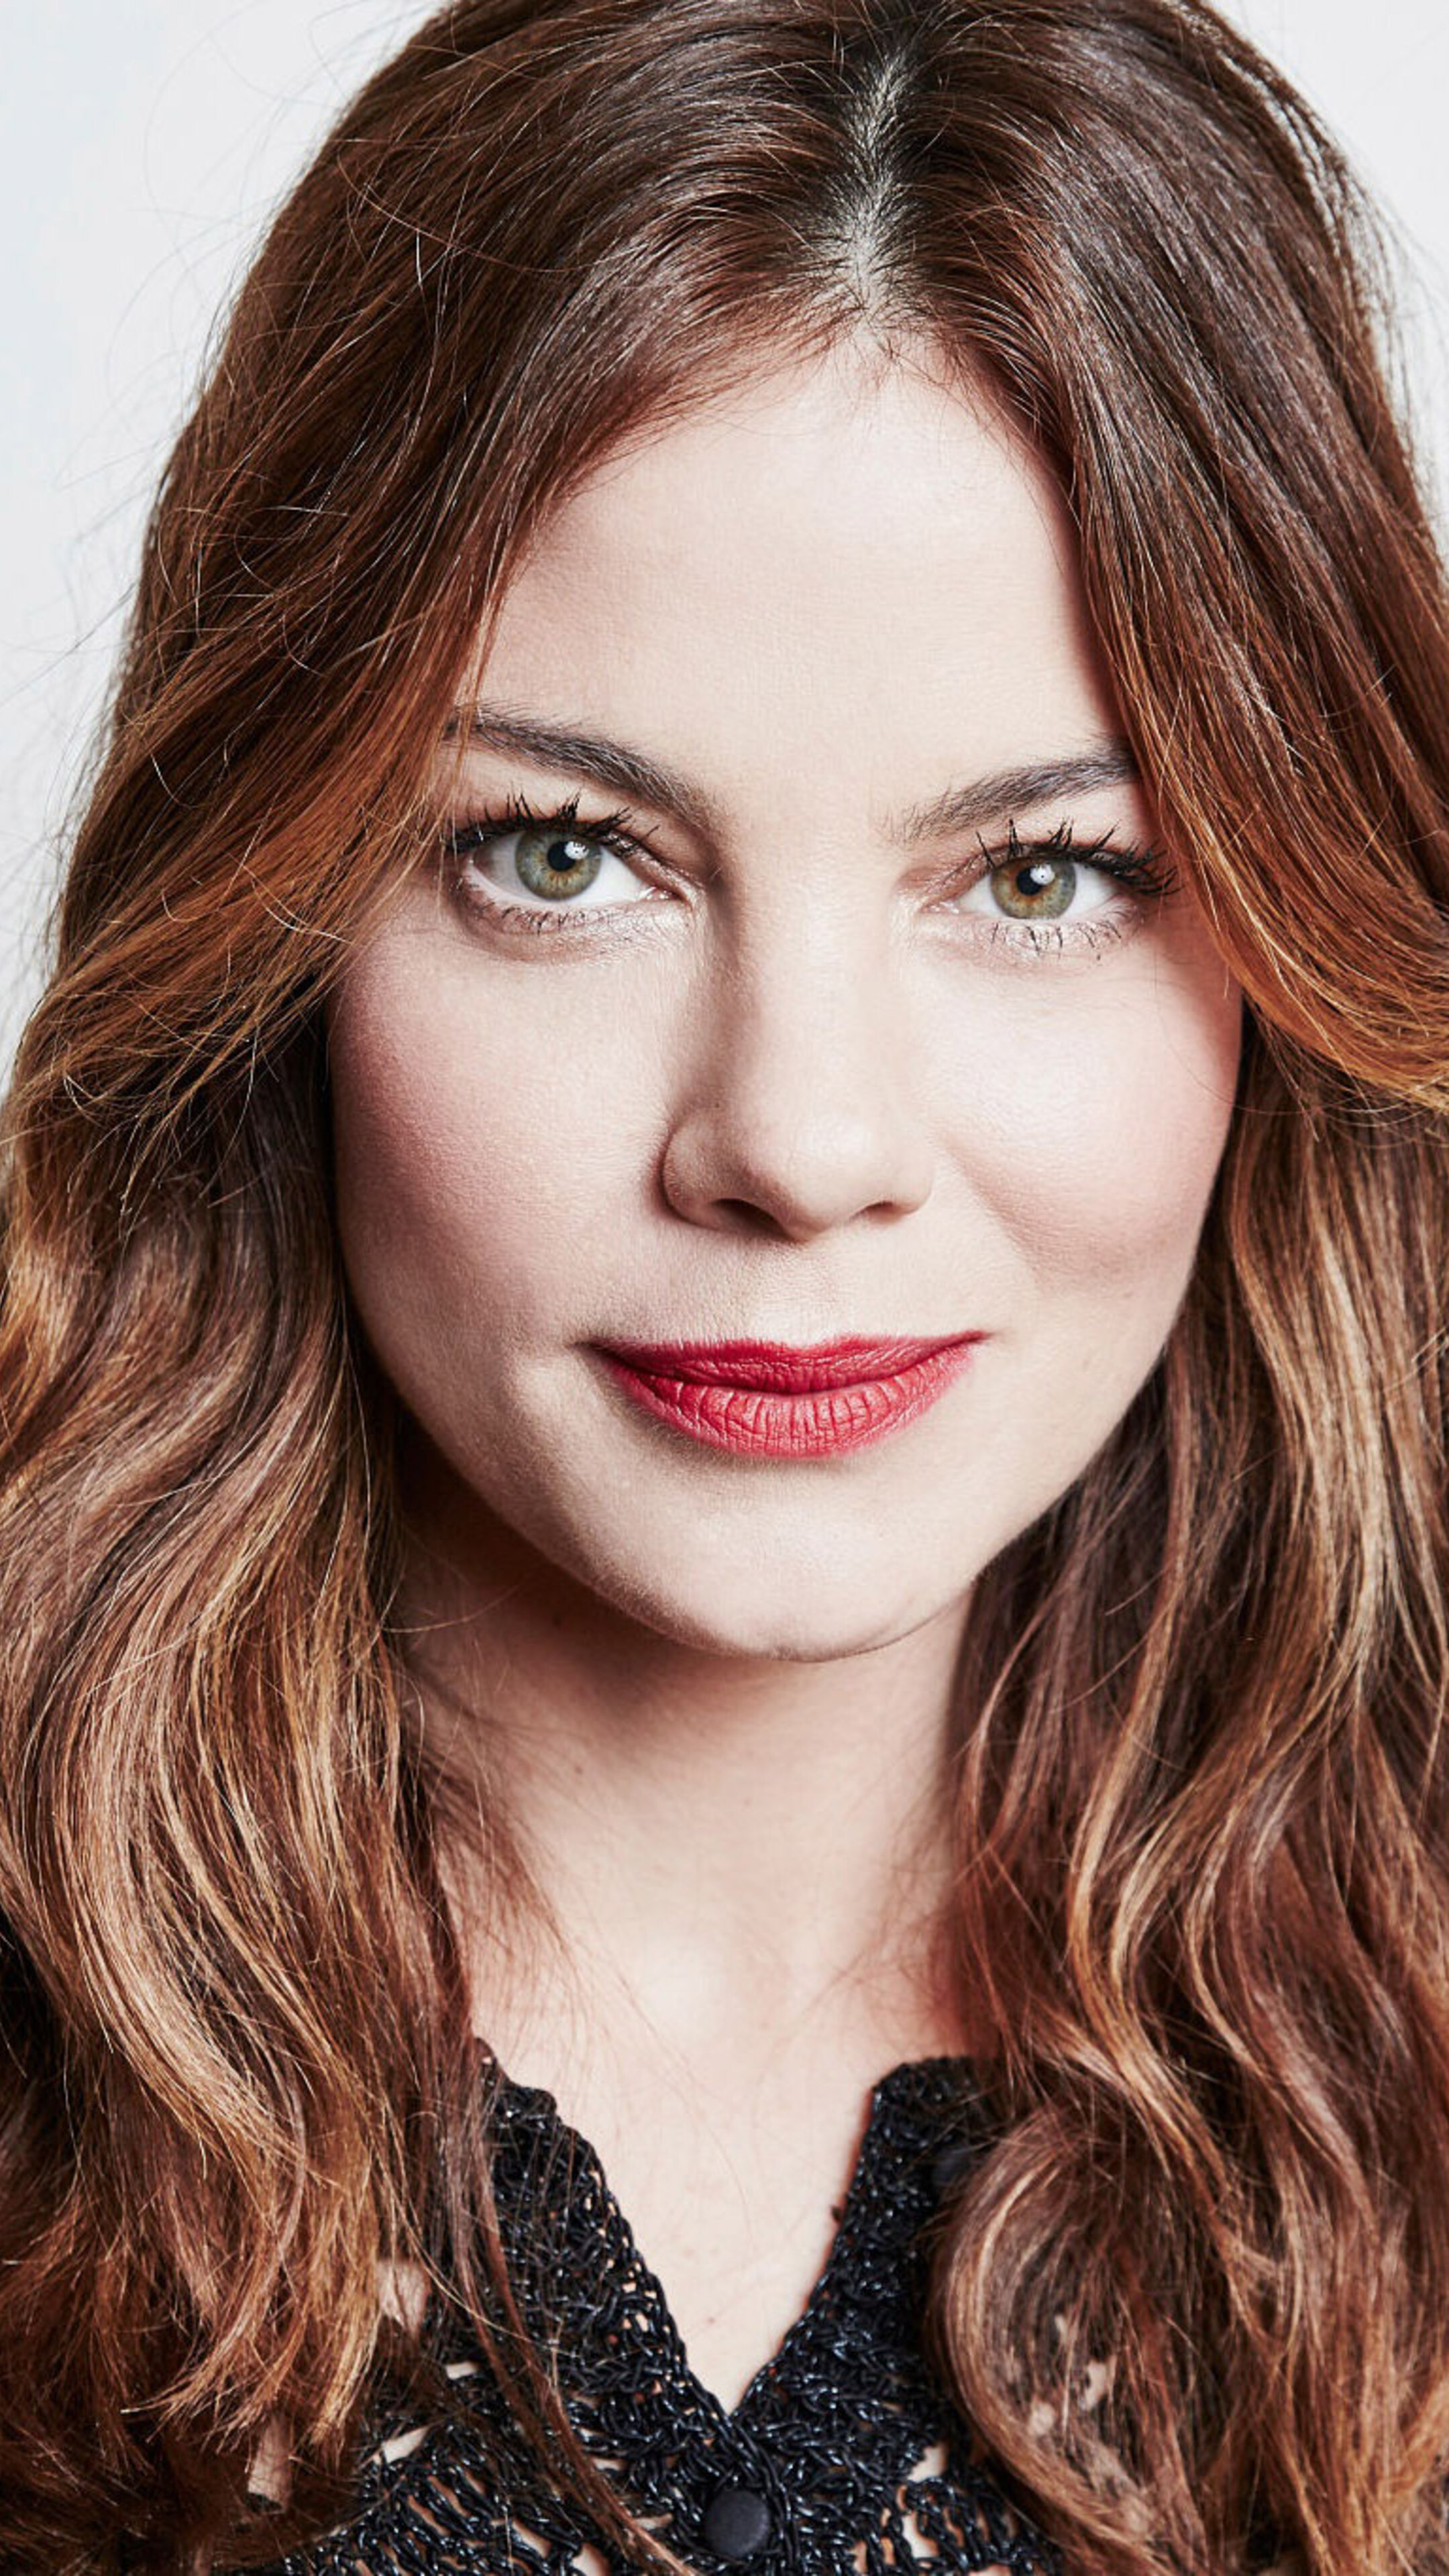 Michelle Monaghan: Maggie Hart, Crime drama series True Detective, 2014, The Golden Globe Award for Best Supporting Actress. 2160x3840 4K Background.